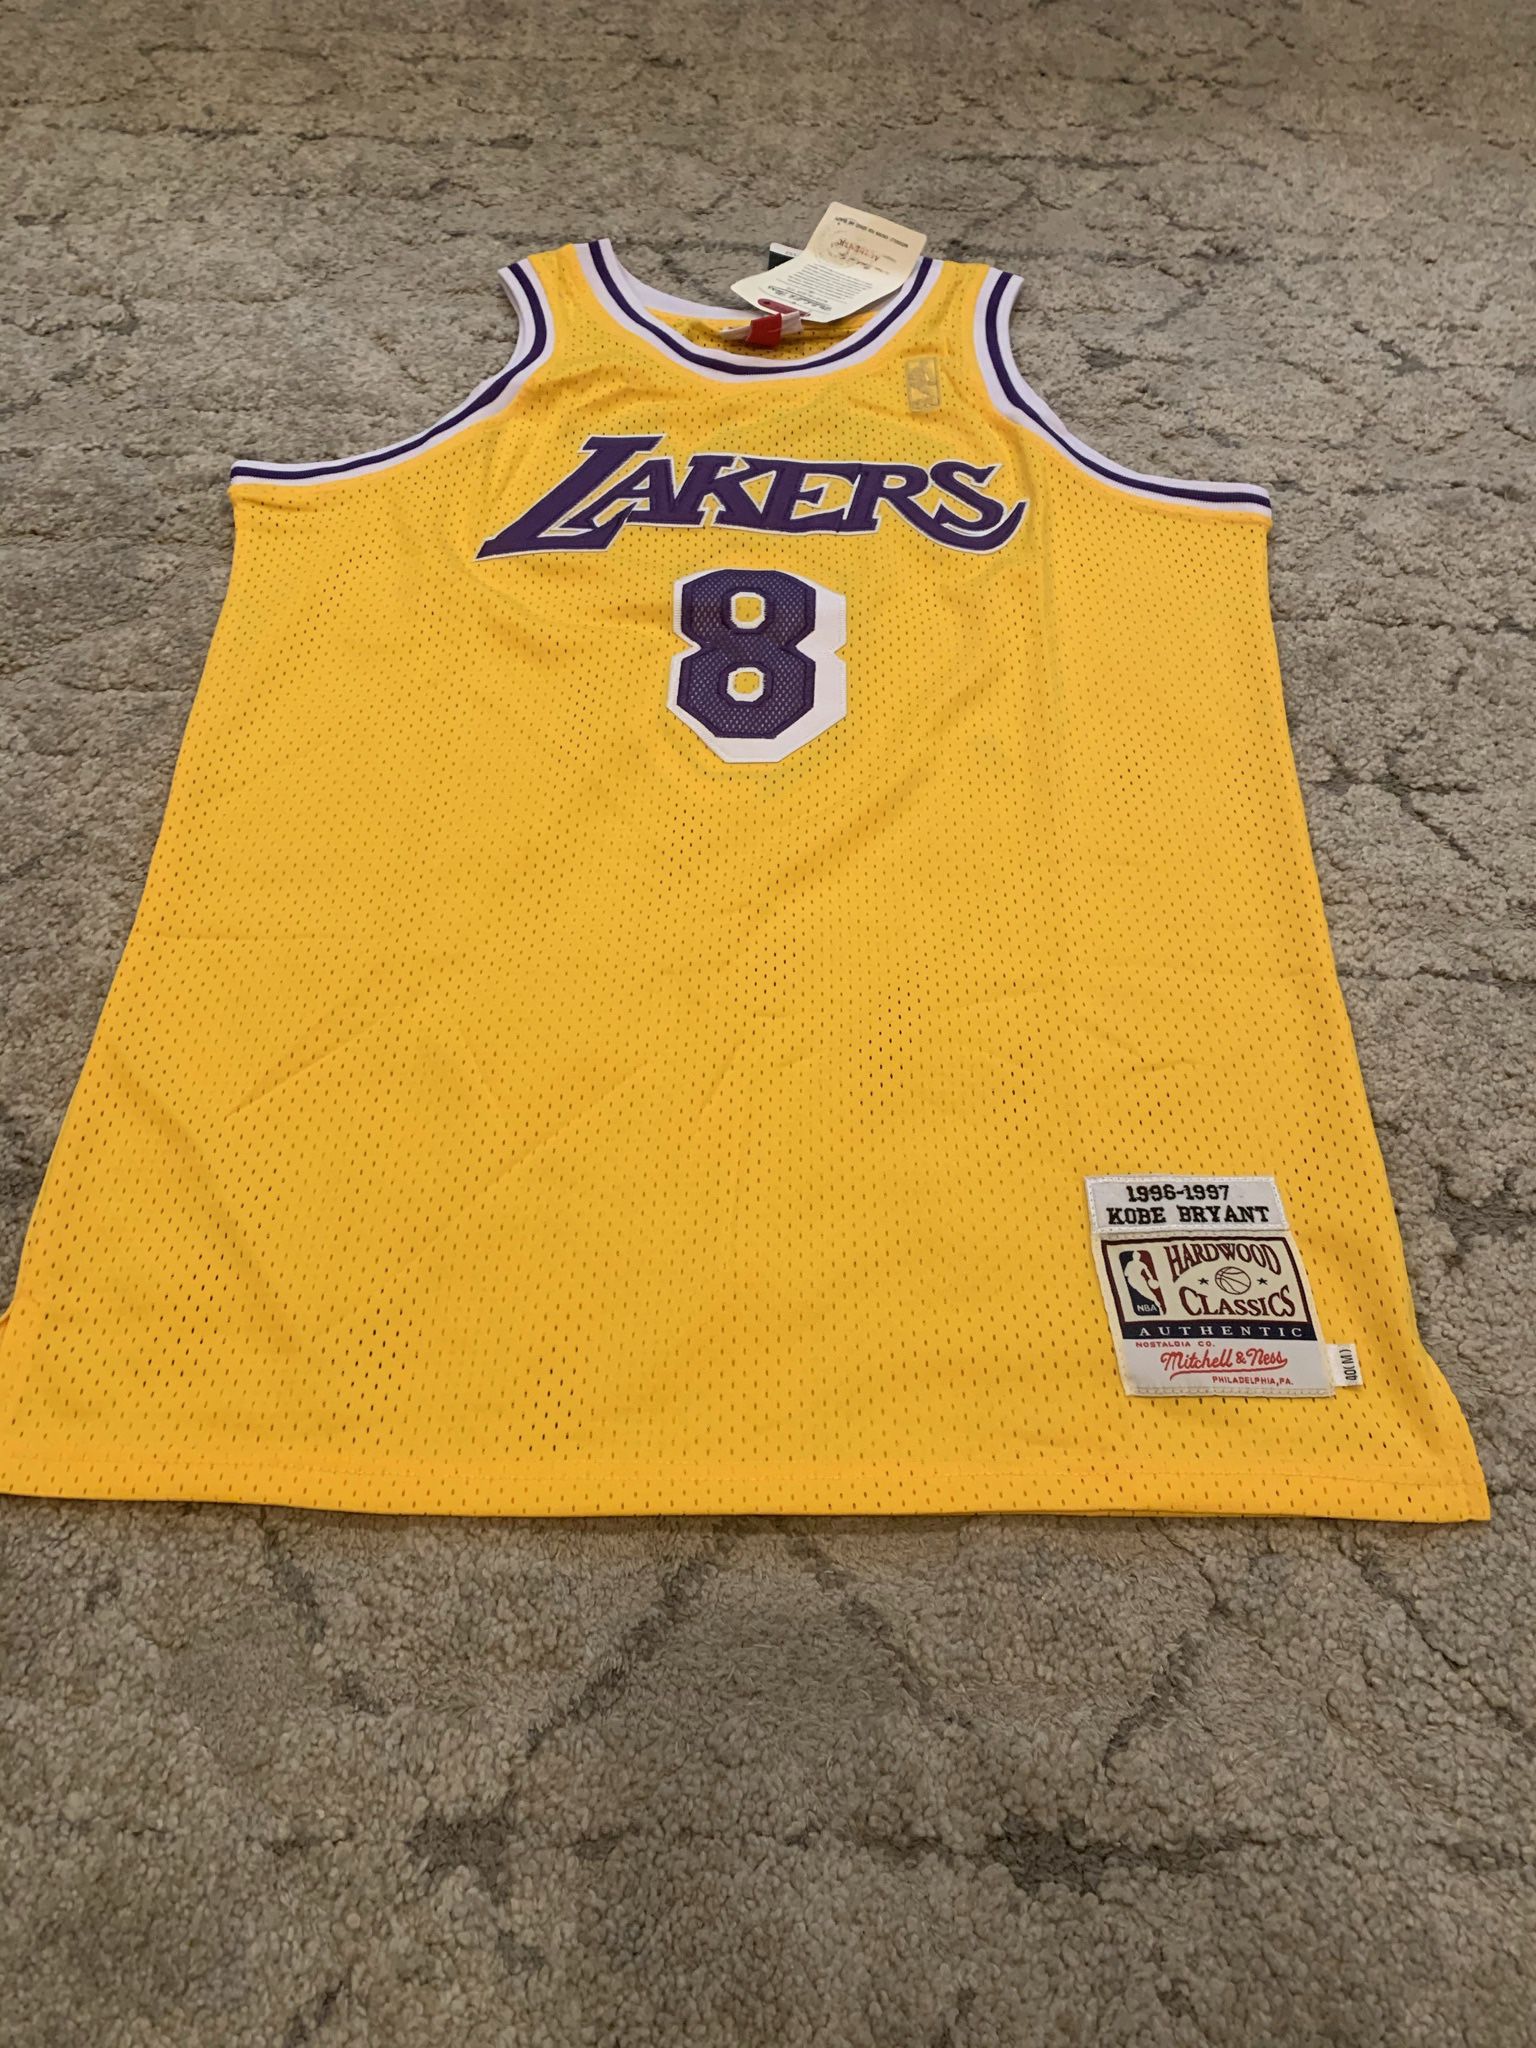 Vintage Nike Kobe Bryant Lakers Jersey Size Medium for Sale in Chicago, IL  - OfferUp